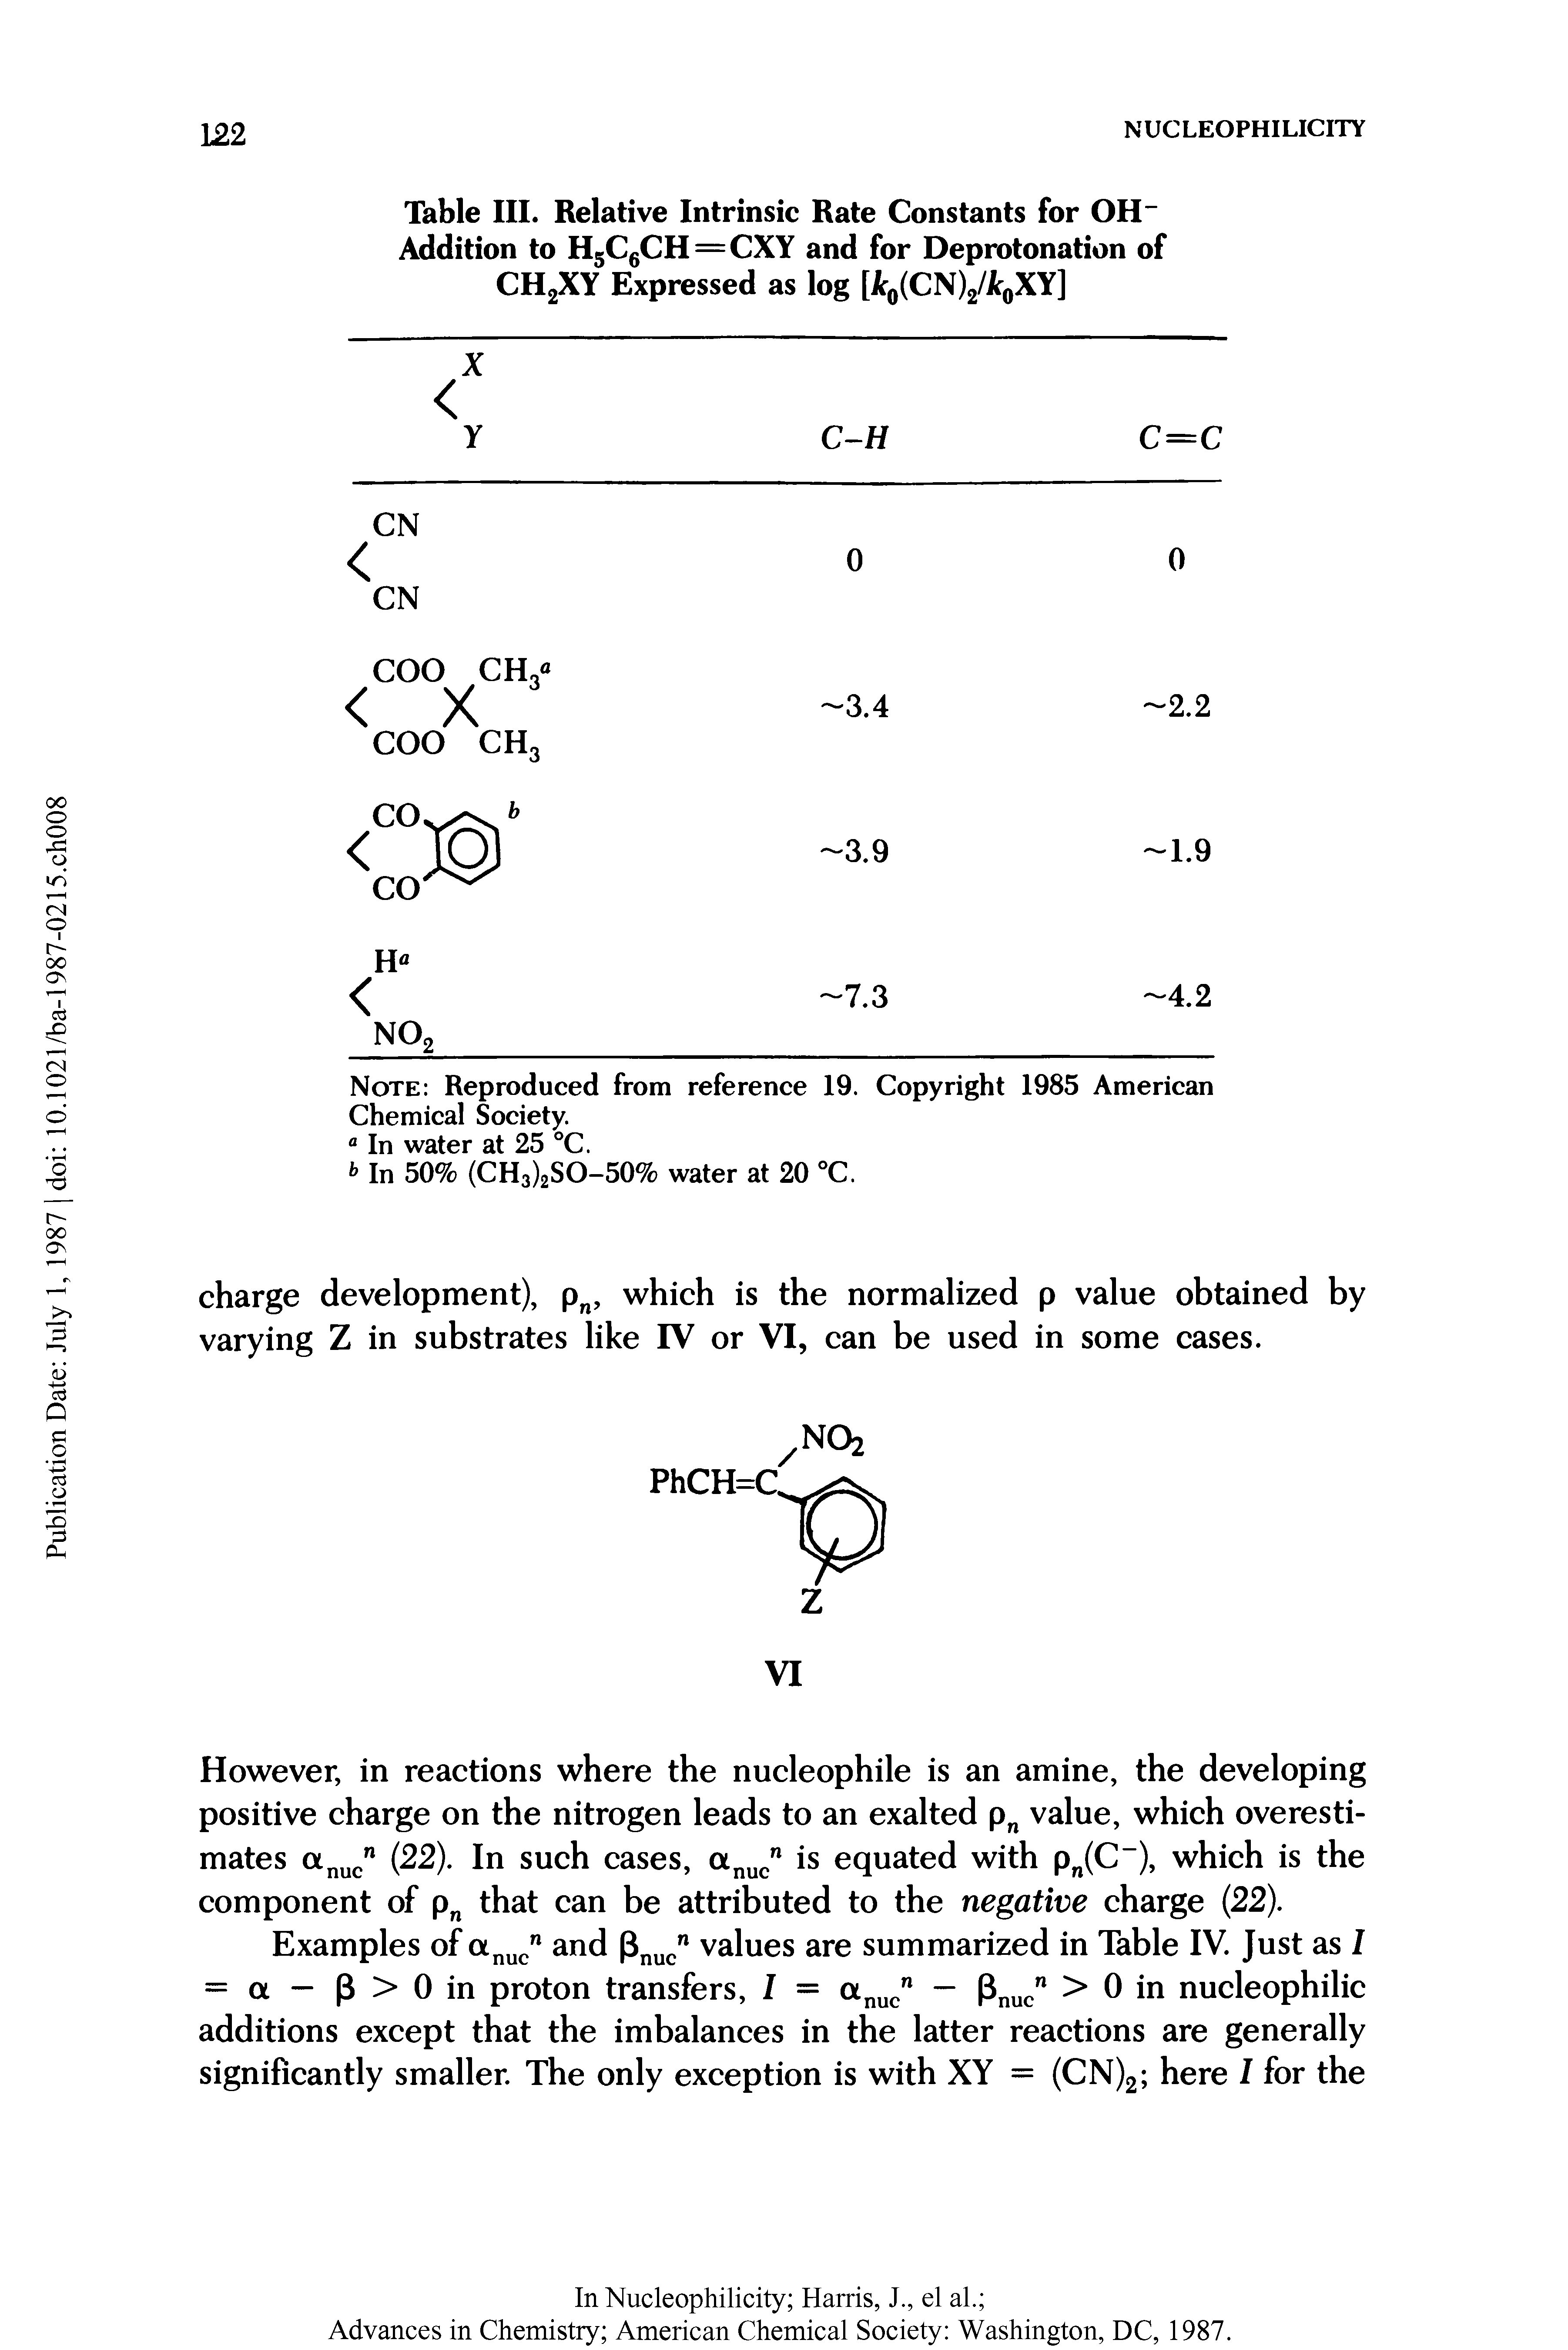 Table III. Relative Intrinsic Rate Constants for OH-Addition to H5C6CH=CXY and for Deprotonation of CH2XY Expressed as log [ 0(CN)2/k0XY]...